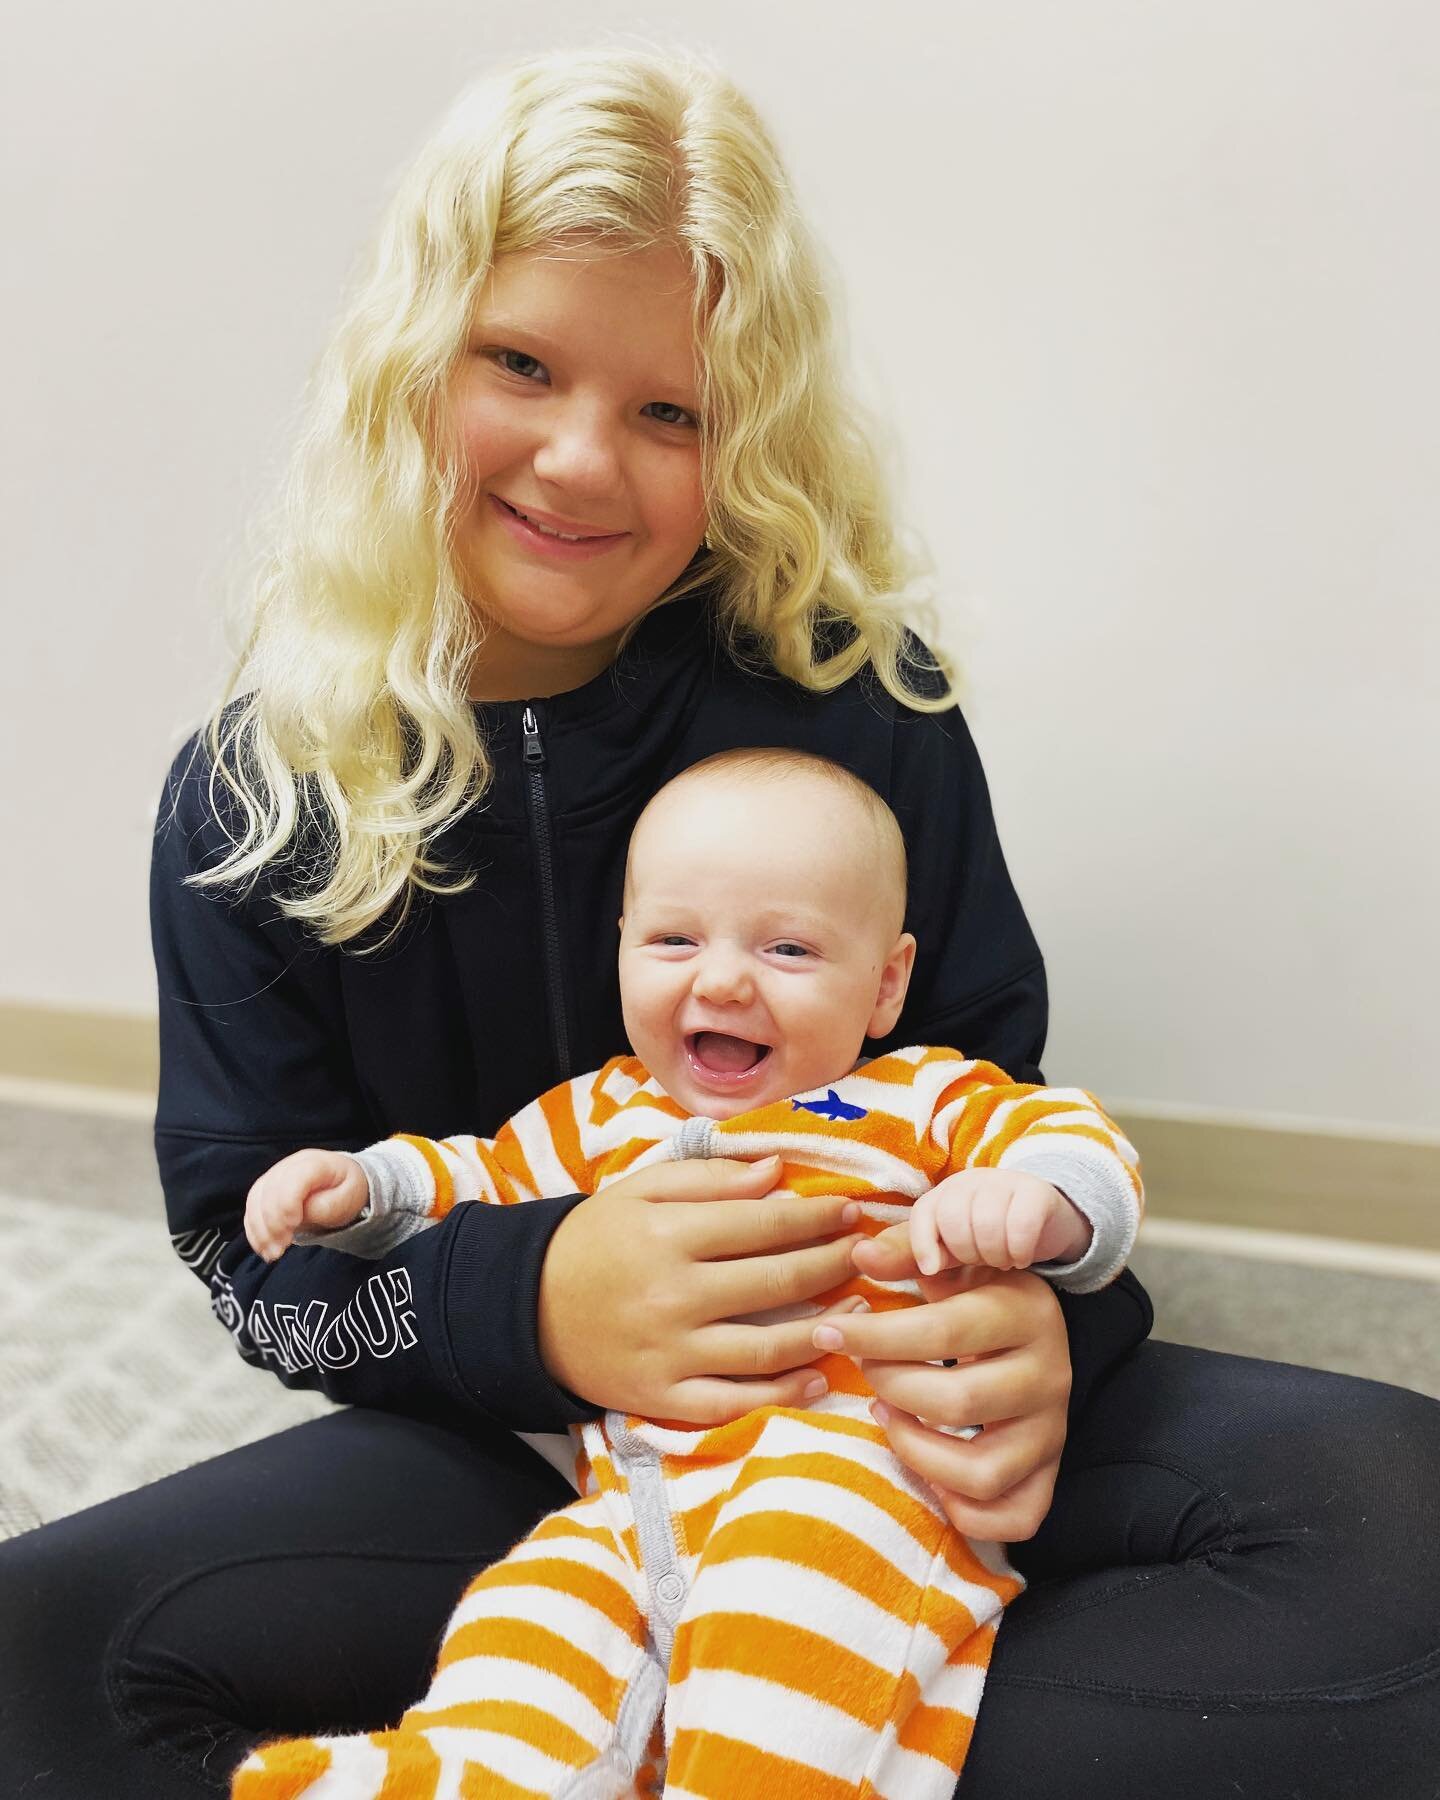 ✨Happy Monday from more of our littles here! ✨ Baby Owen loves all his friends at the practice 🥰